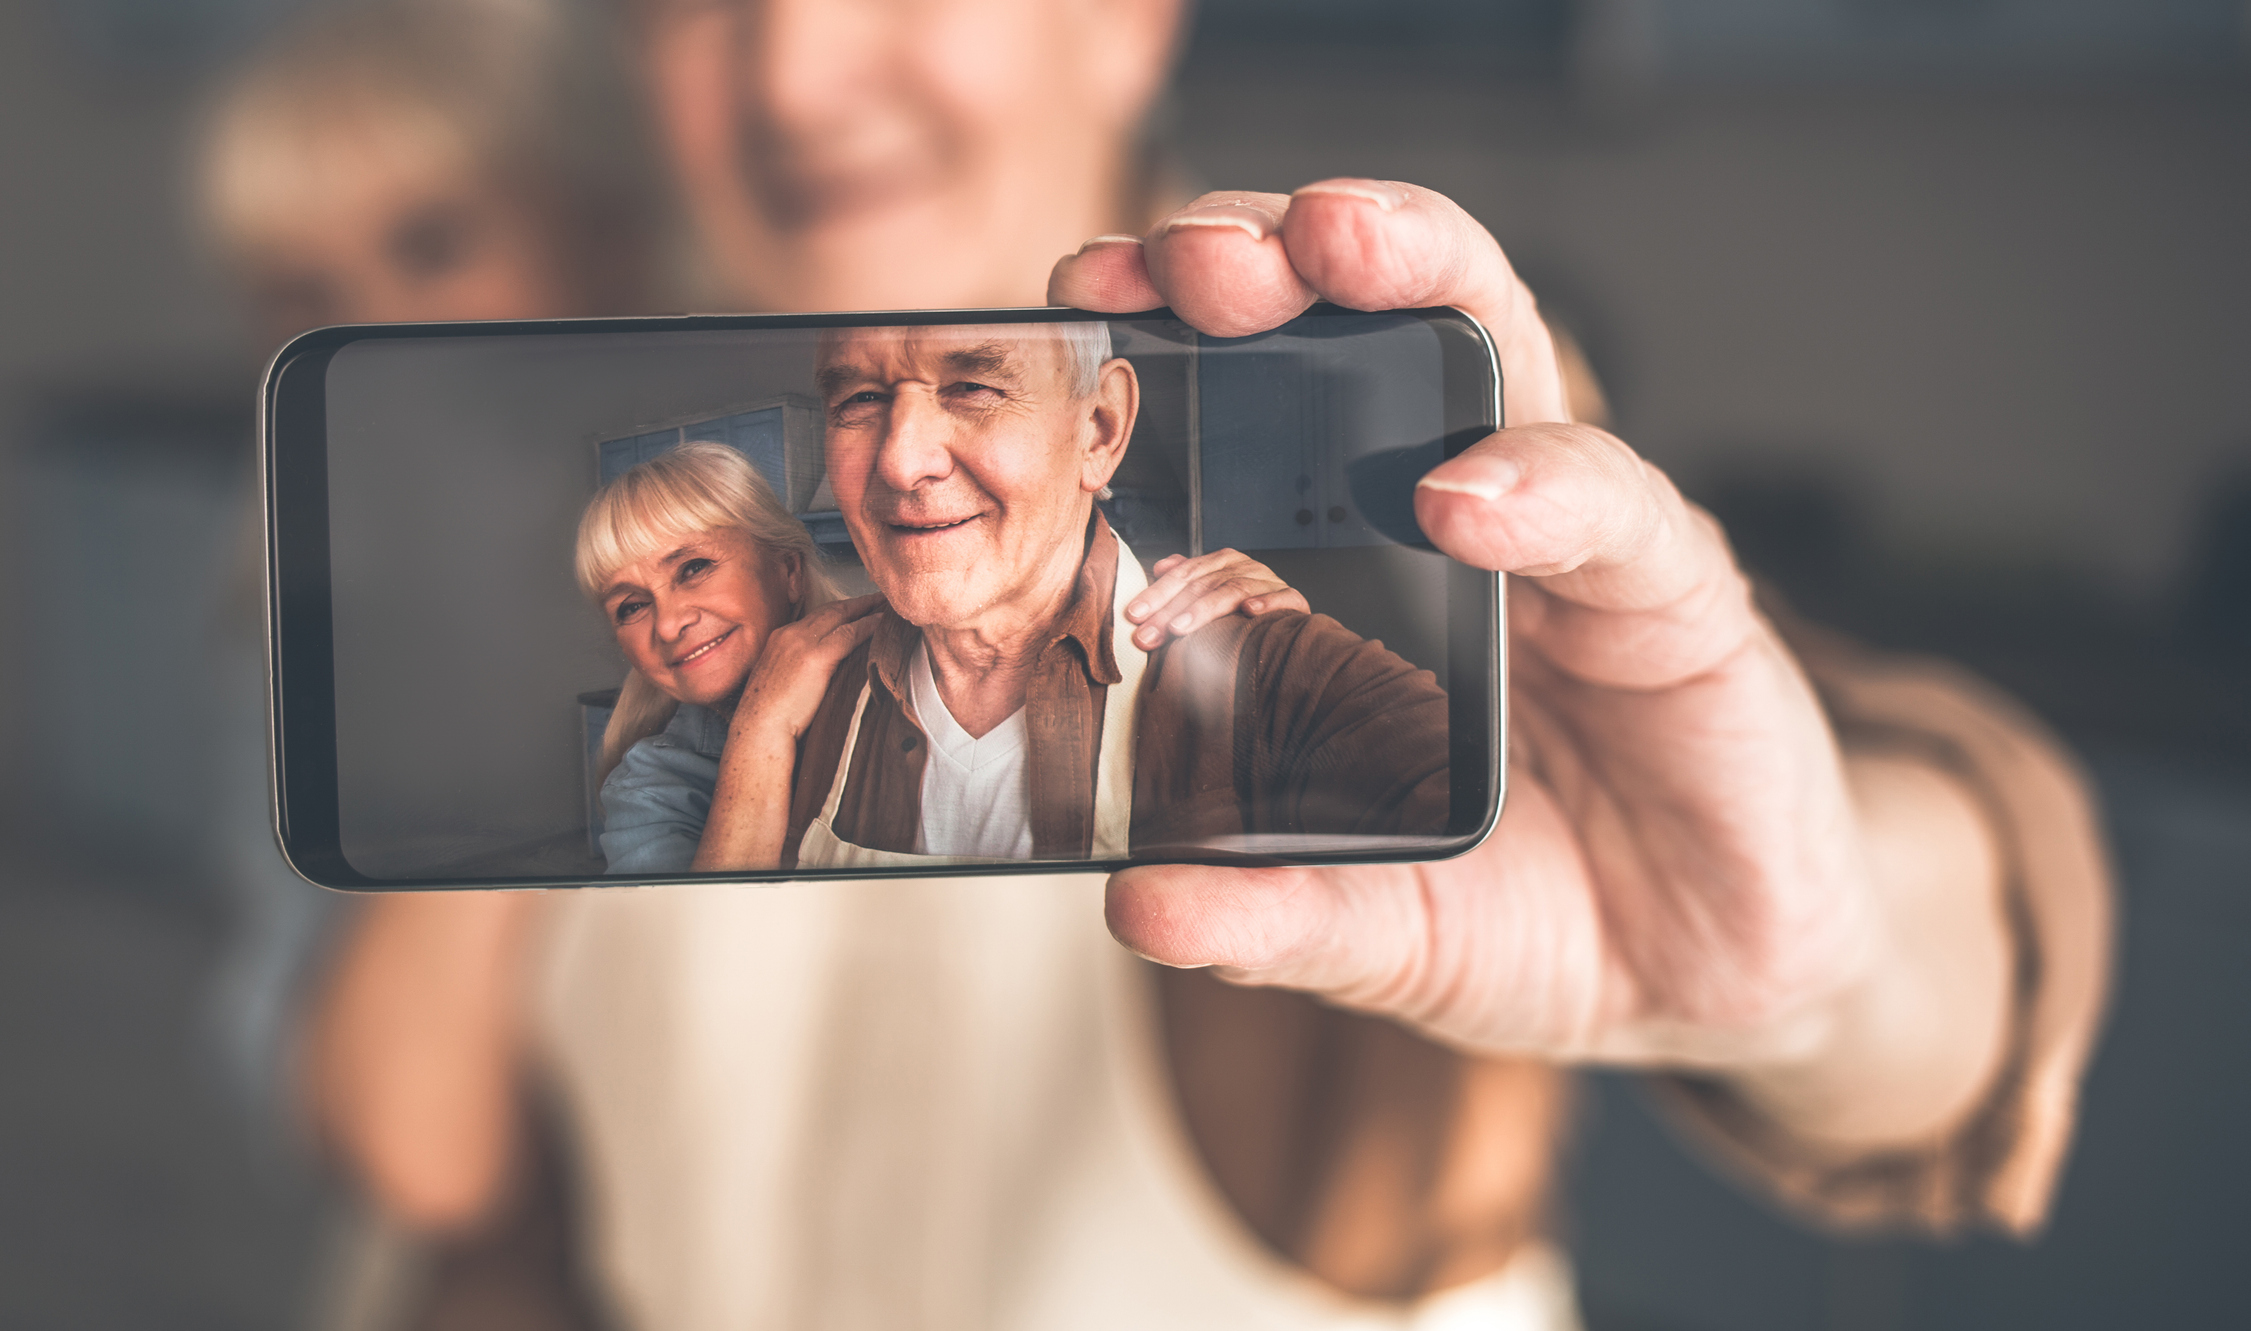 Always happy together. Portrait of glad old loving couple embracing while taking photos. They are standing in kitchen and smiling. Focus on smartphone